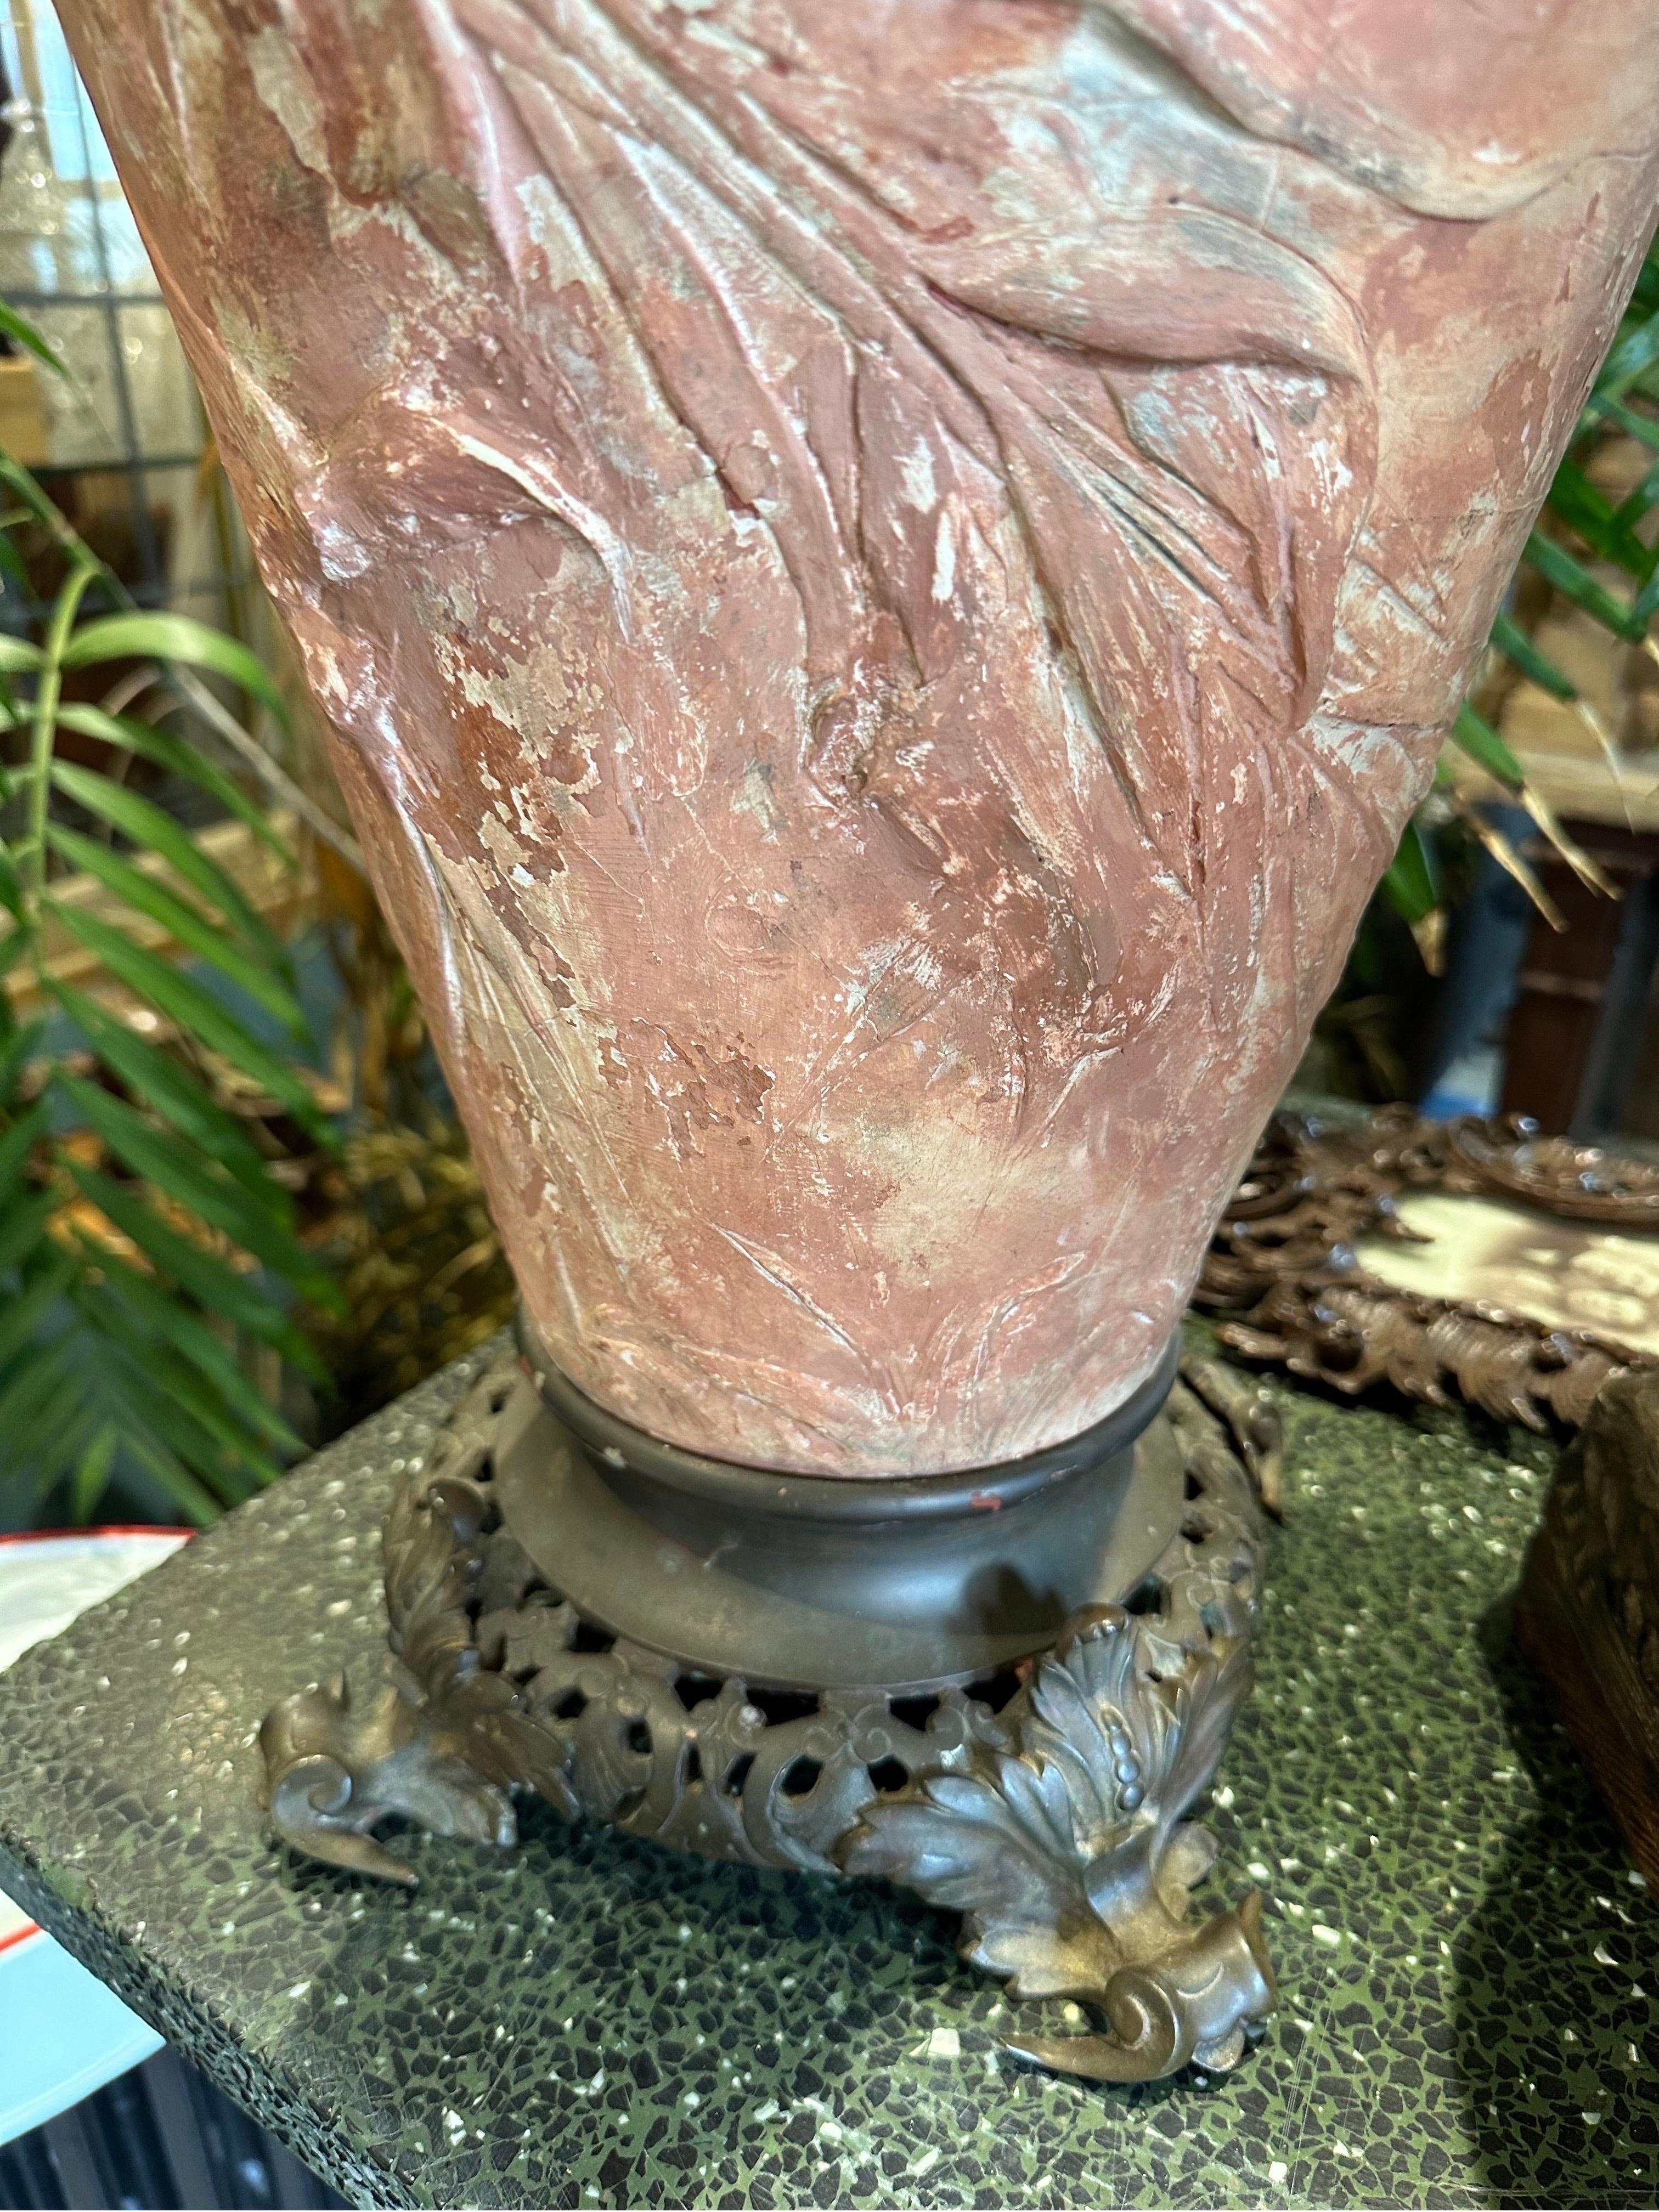 A very beautiful and one of a kind base from the important Art Nouveau movement. Signed and dated on the base, it’s been an important piece in my clients home for nearly 100 years. 

With bronze base and bronze top. In beautiful condition with